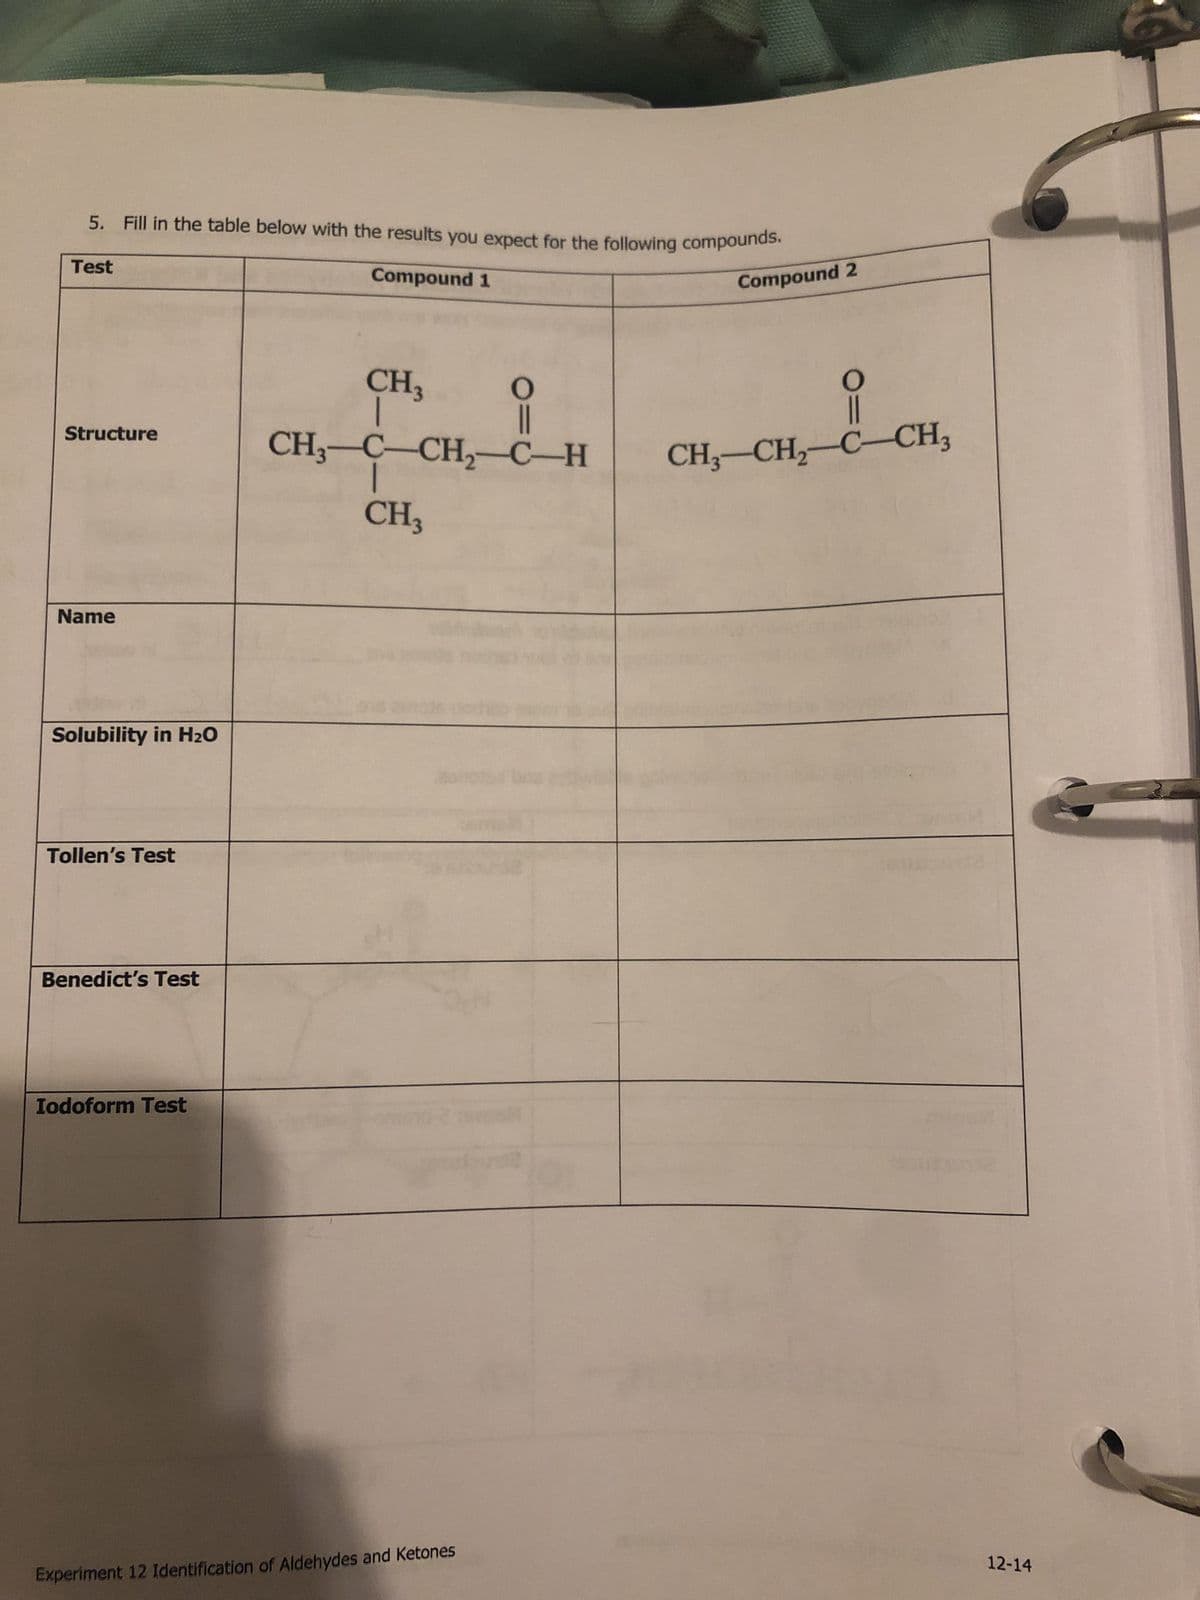 5. Fill in the table below with the results you expect for the following compounds.
Compound 1
Test
Structure
Name
Solubility in H₂O
Tollen's Test
Benedict's Test
Iodoform Test
CH3
CH3CCH,CH
I
CH3
O
||
Experiment 12 Identification of Aldehydes and Ketones
Compound 2
O
CH–CH,C–CH,
12-14